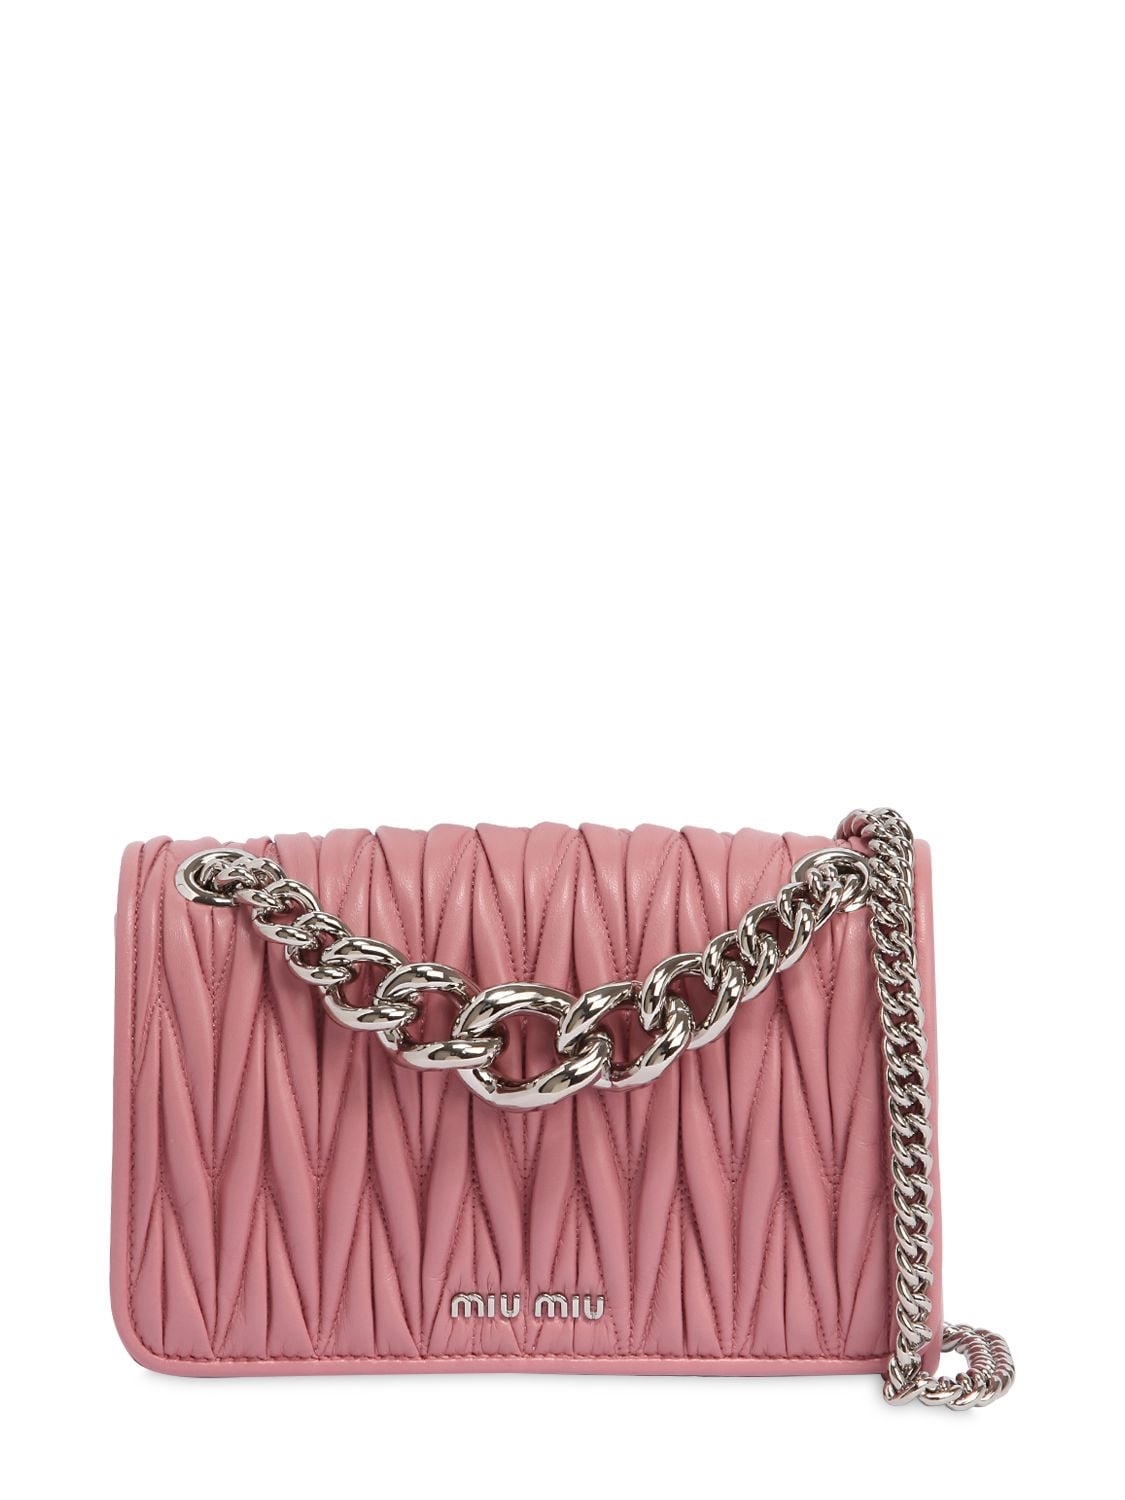 Miu Miu Club Quilted Leather Shoulder Bag In Pink | ModeSens